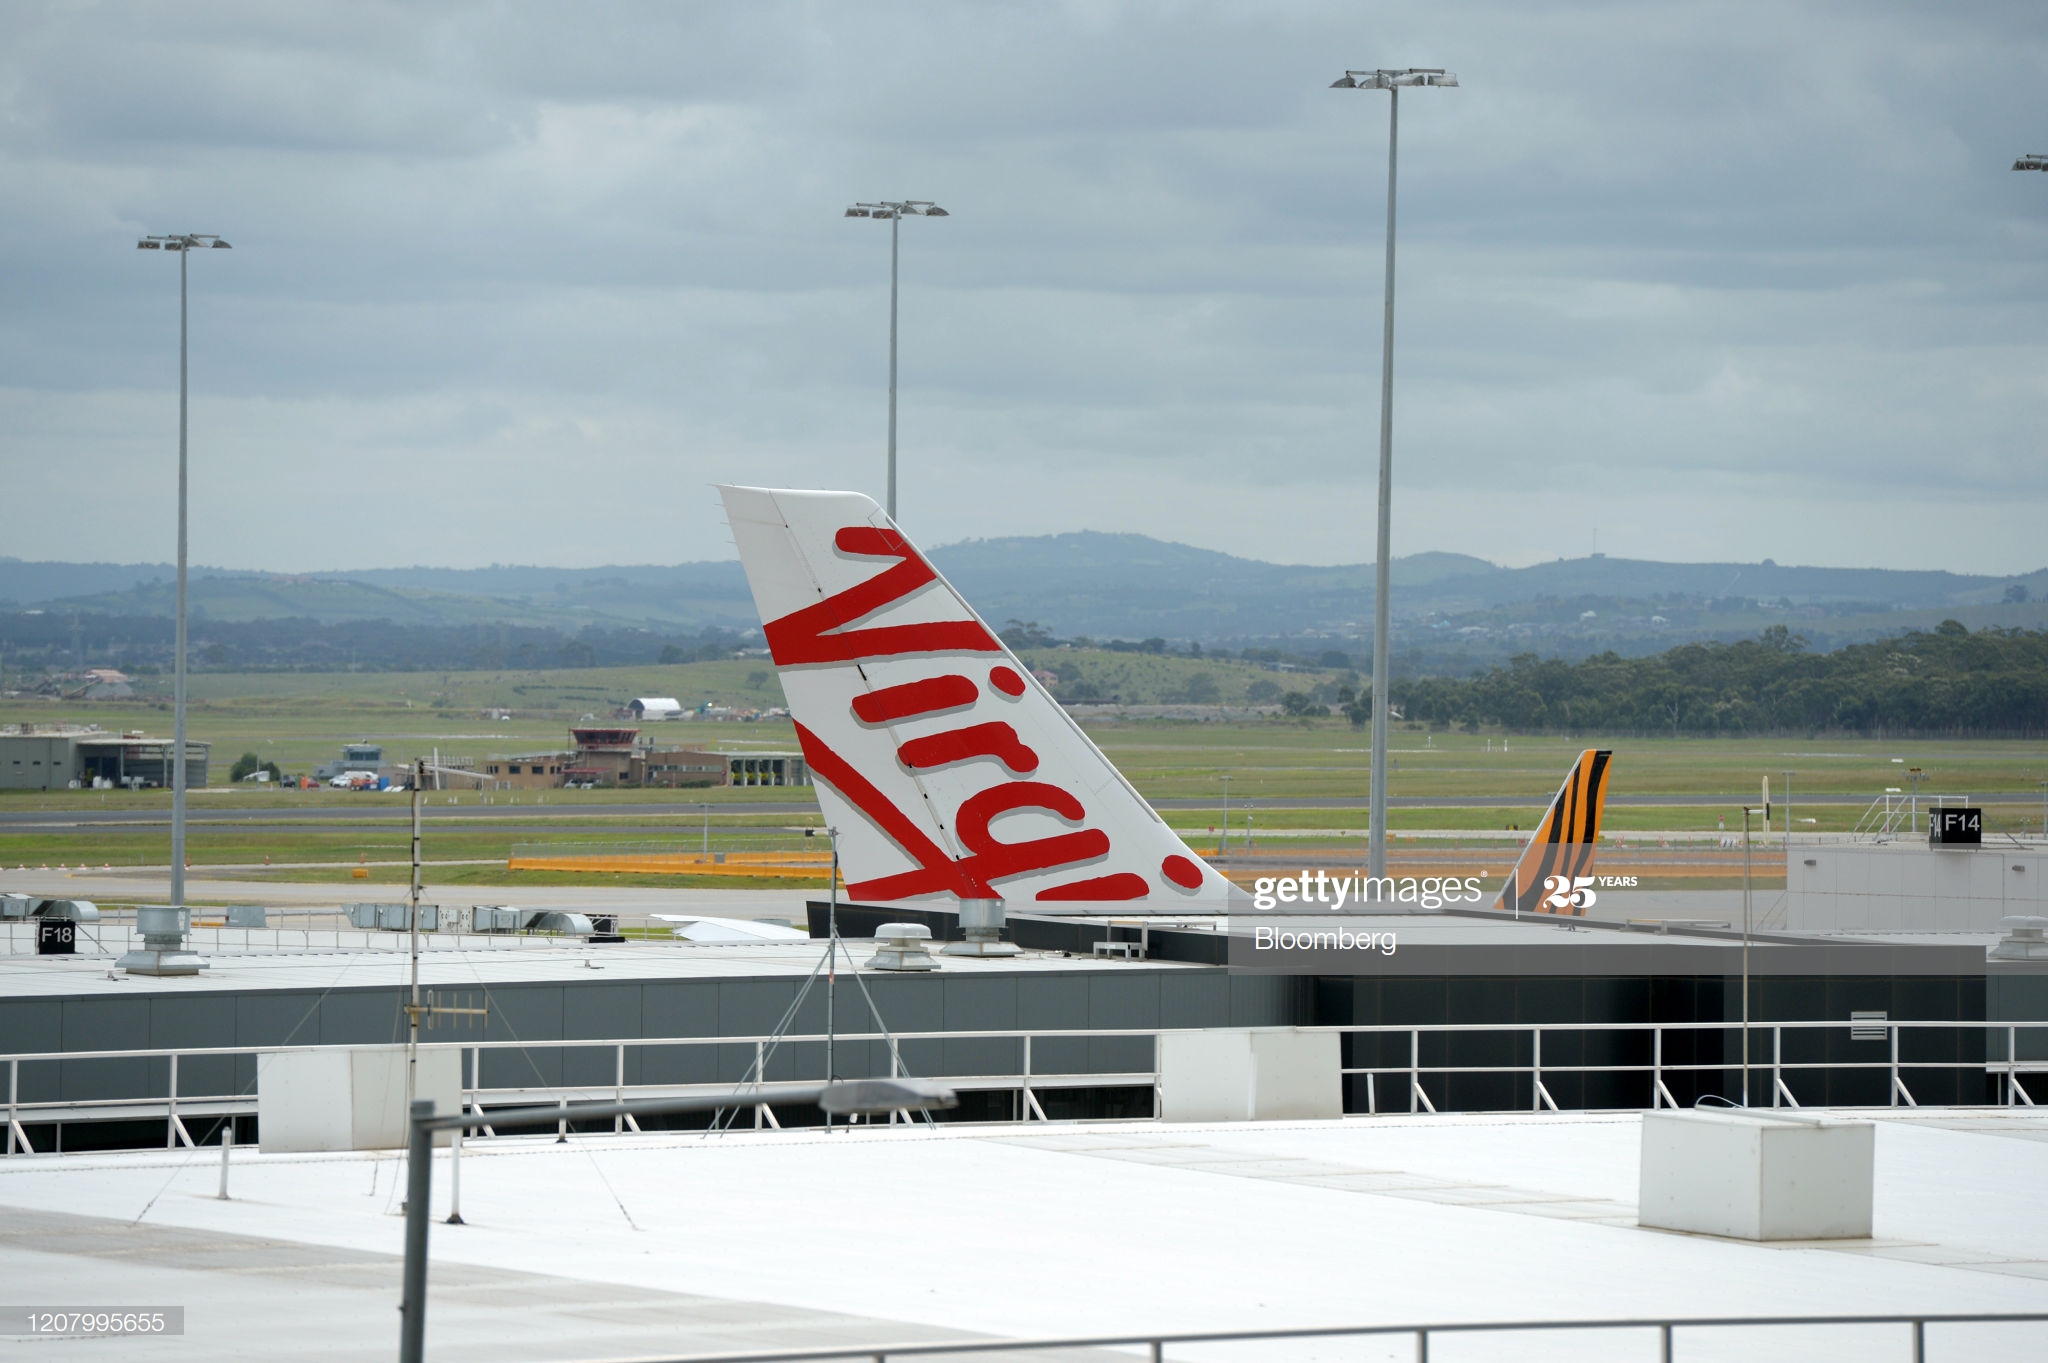 passenger-aircraft-operated-by-virgin-australia-holdings-ltd-left-and-picture-id1207995655